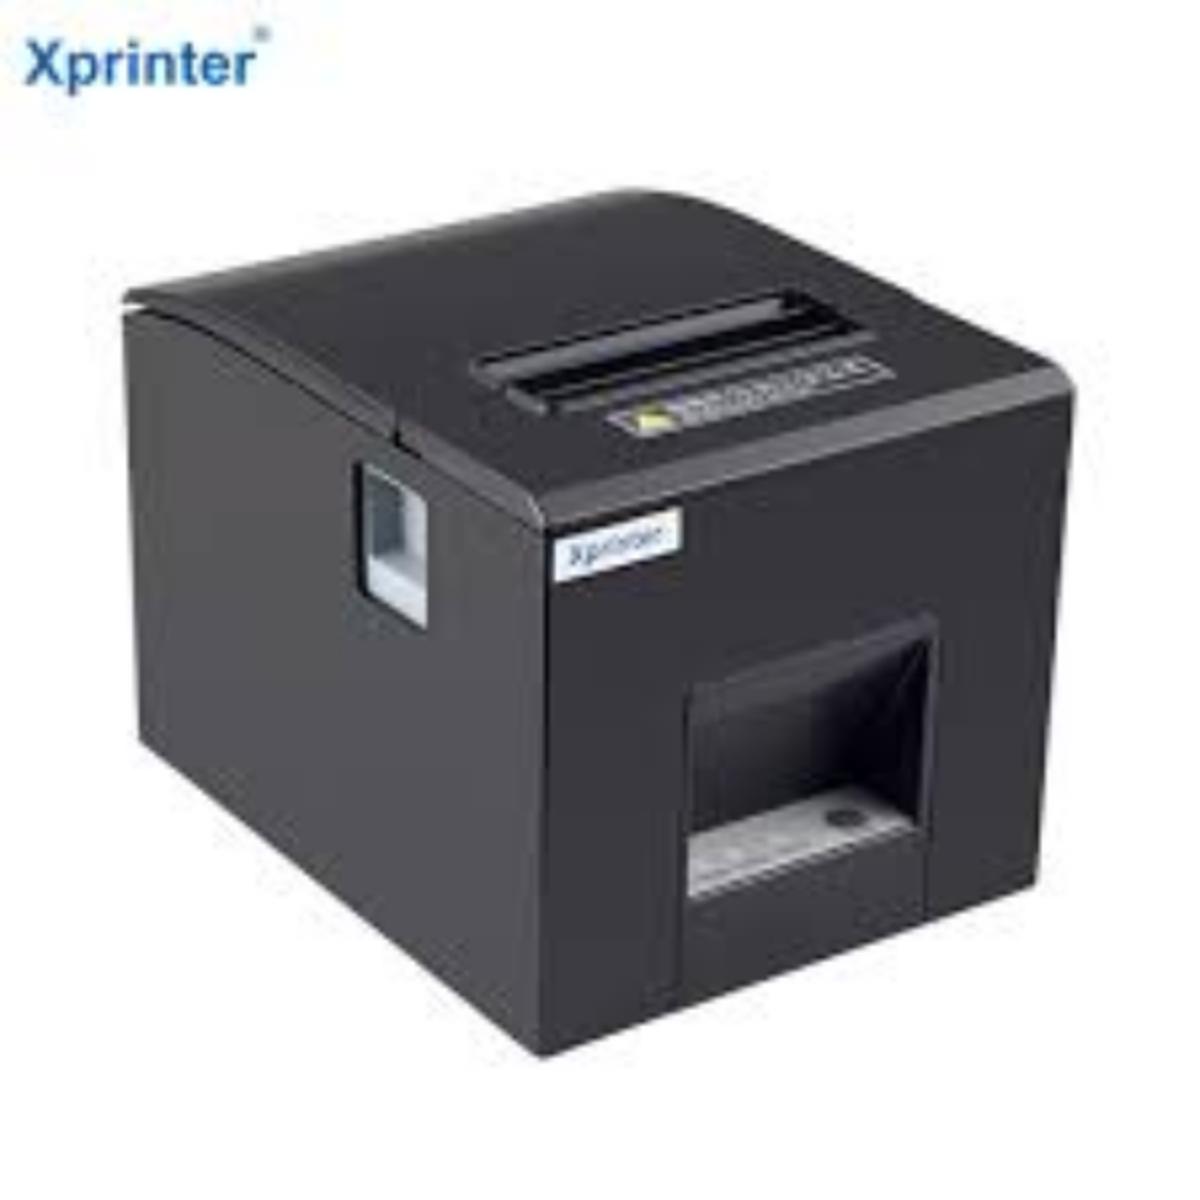 Wholesale 112mm thermal printer SP-TL51 Multi-interface support  Manufacturer and Supplier